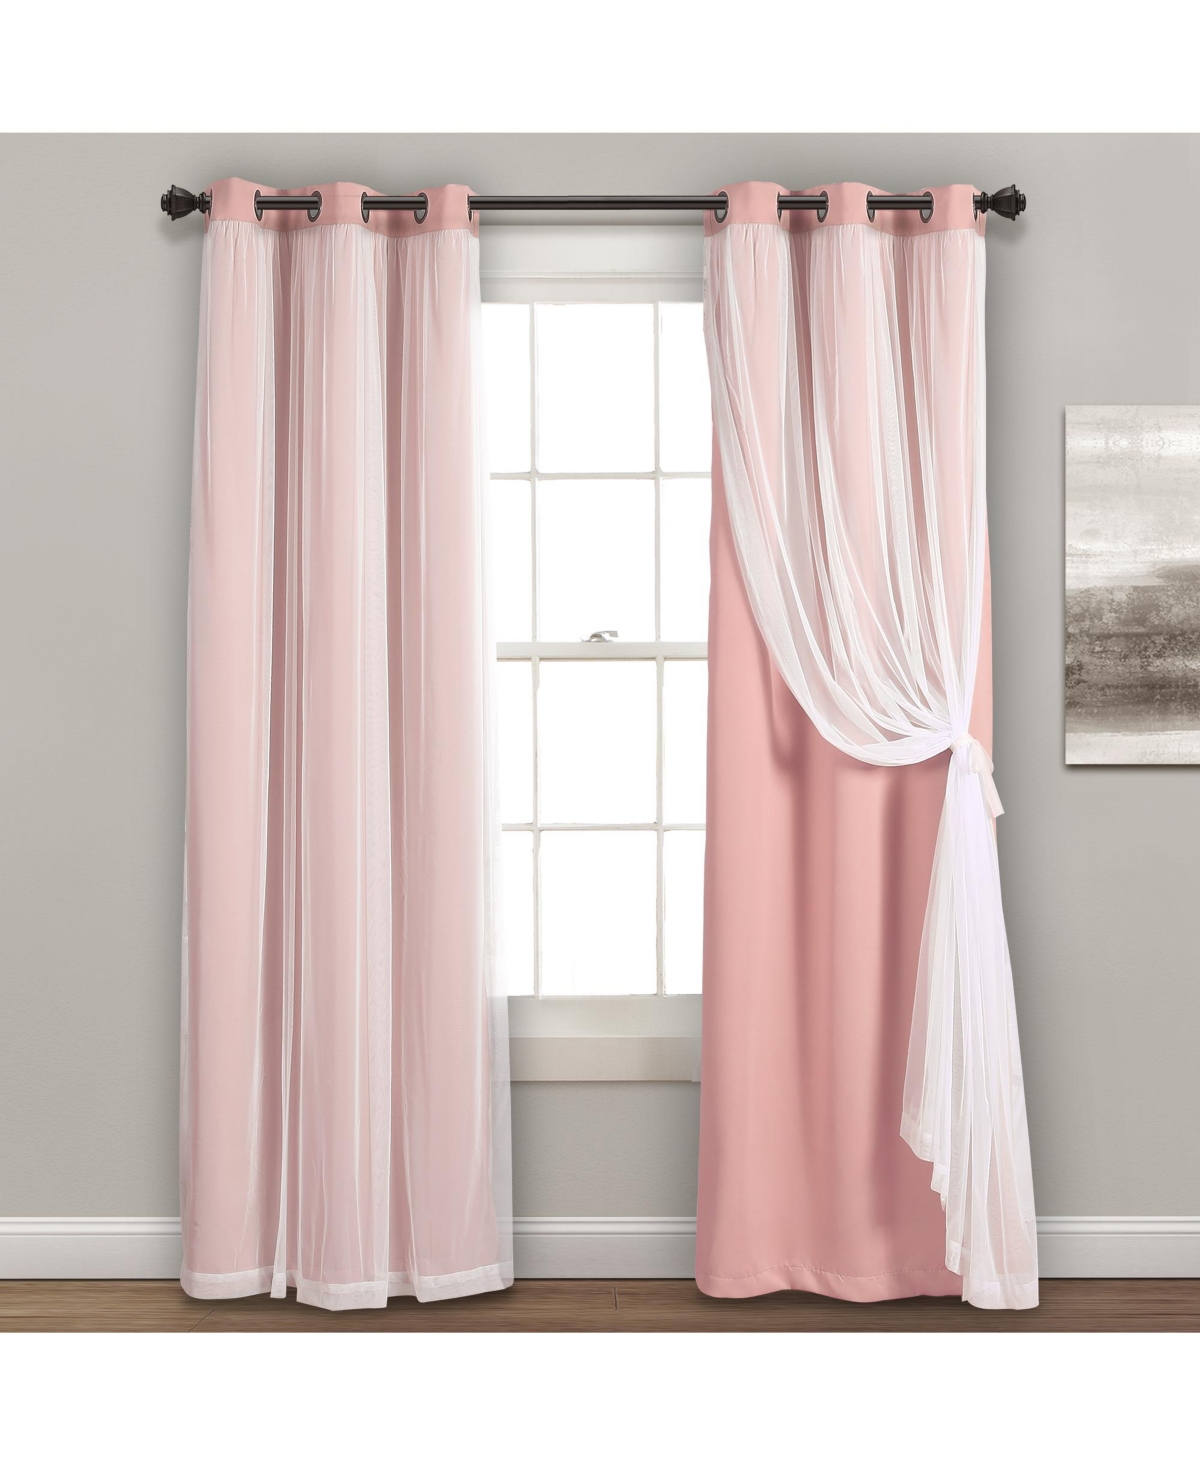 Lush Decor Grommet Sheer Panels With Insulated Blackout Lining In Pink